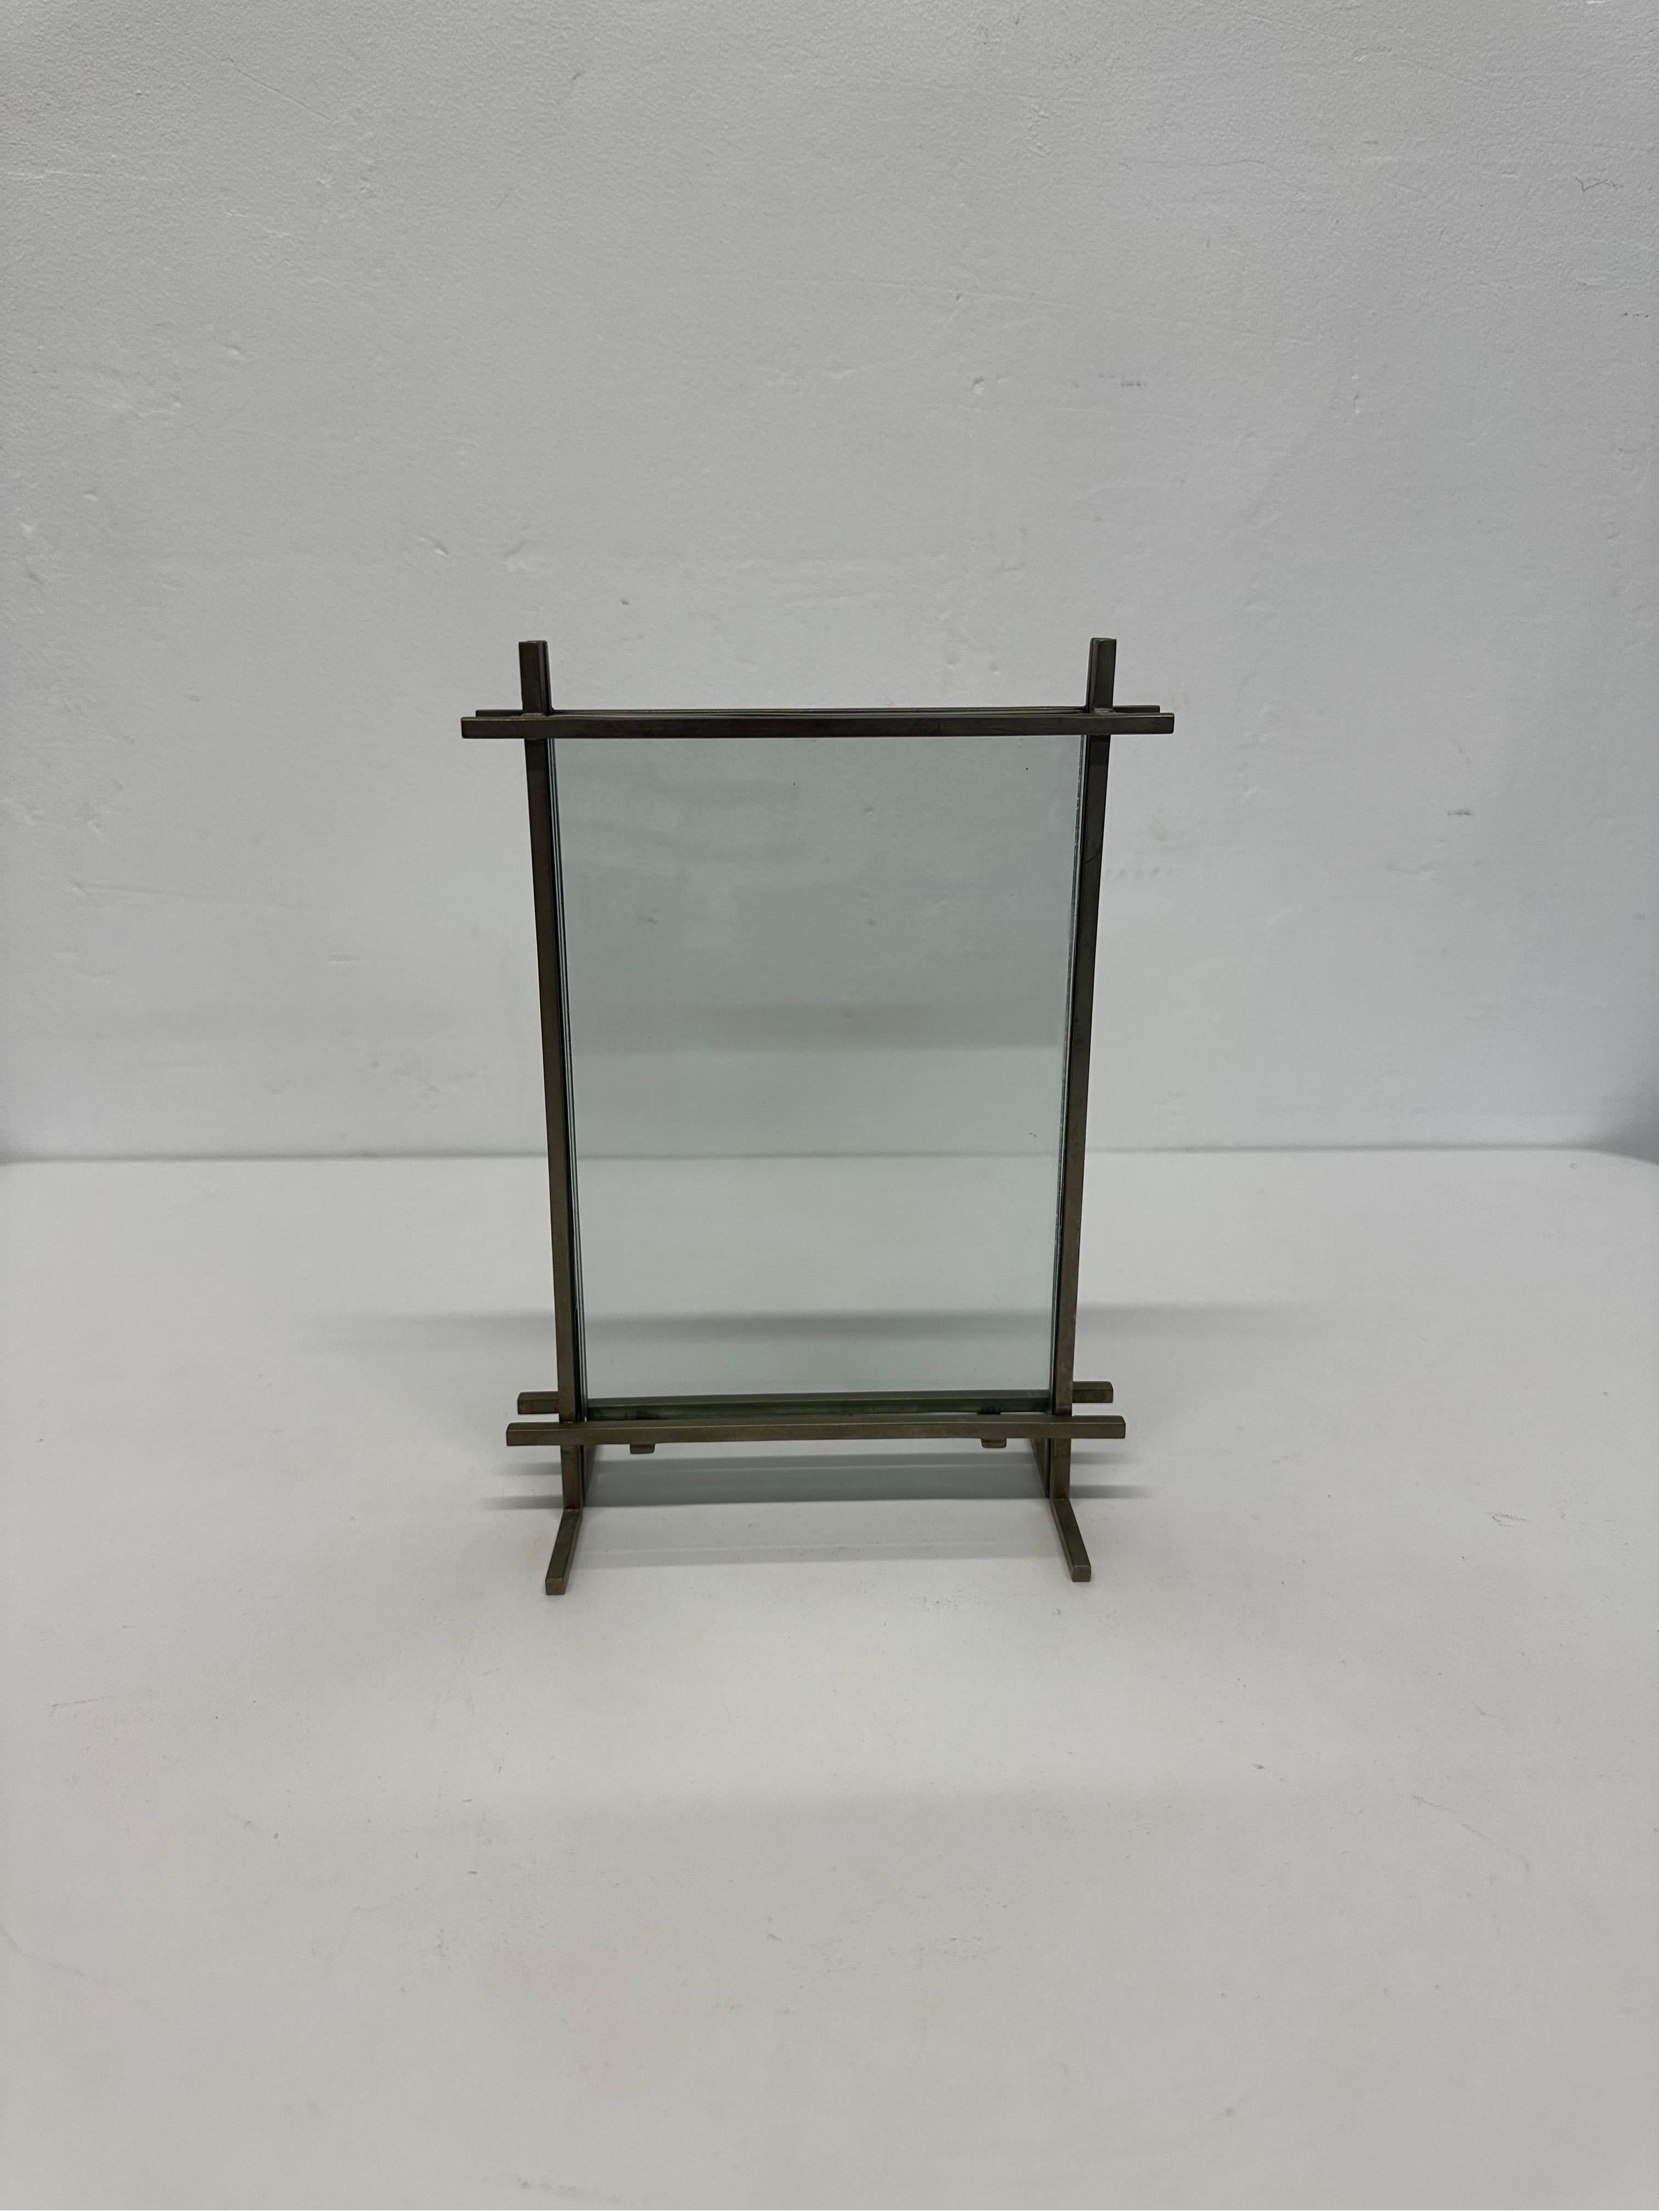 Welded steel picture frame with double glass insert, 1970s.